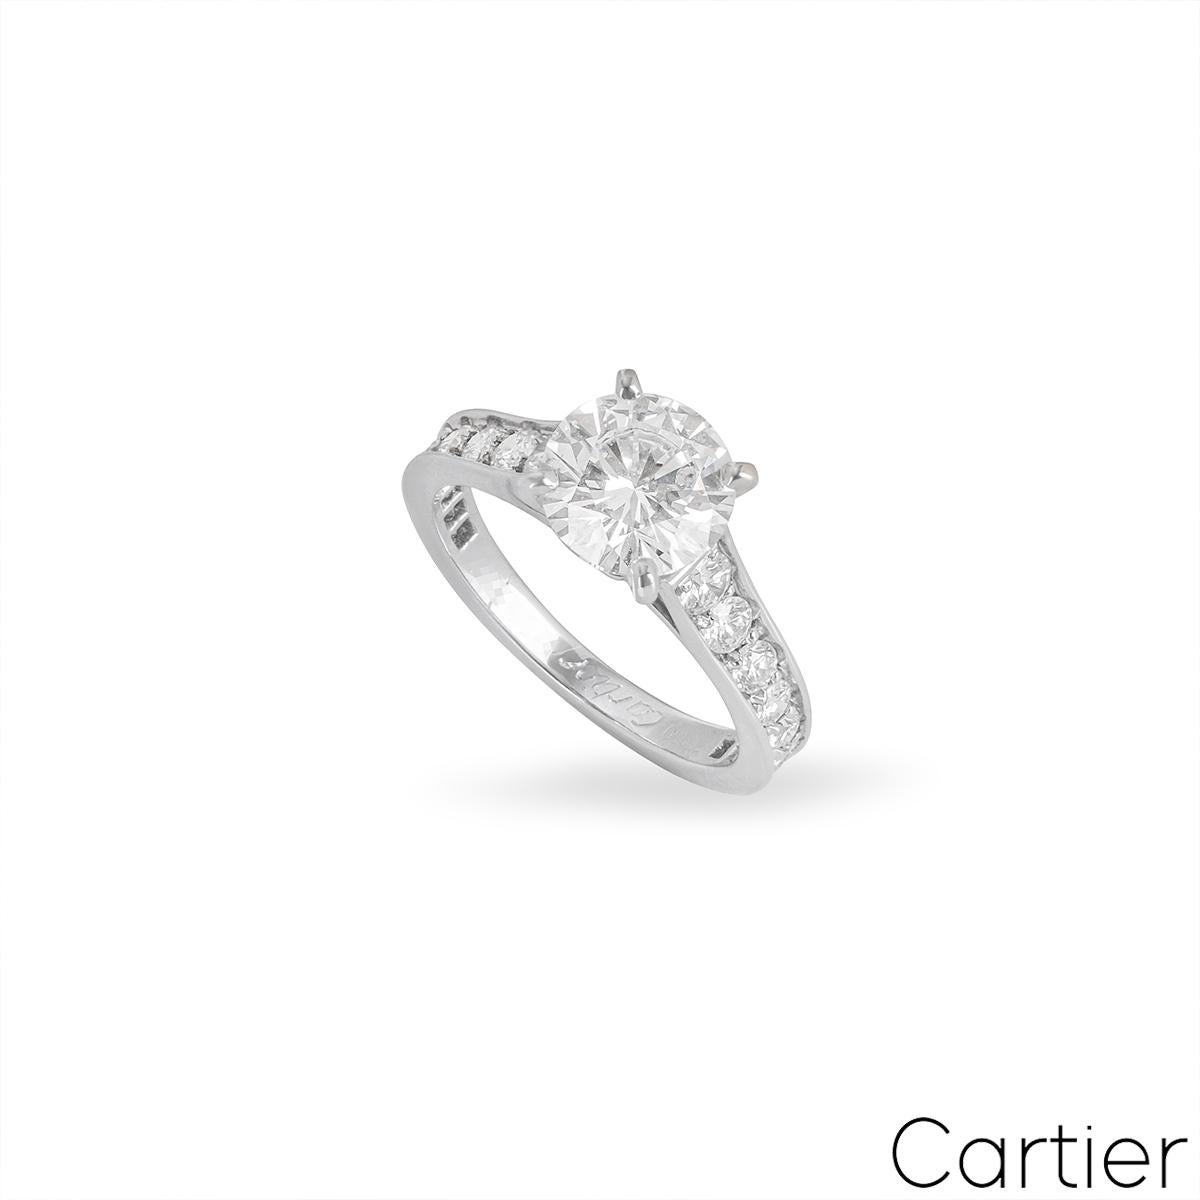 A beautiful platinum diamond ring from the Solitaire 1895 collection by Cartier. The ring is set to the centre with a 1.70ct round brilliant cut diamond, G colour and VVS1 in clarity. The ring has tapered diamond set shoulders totalling